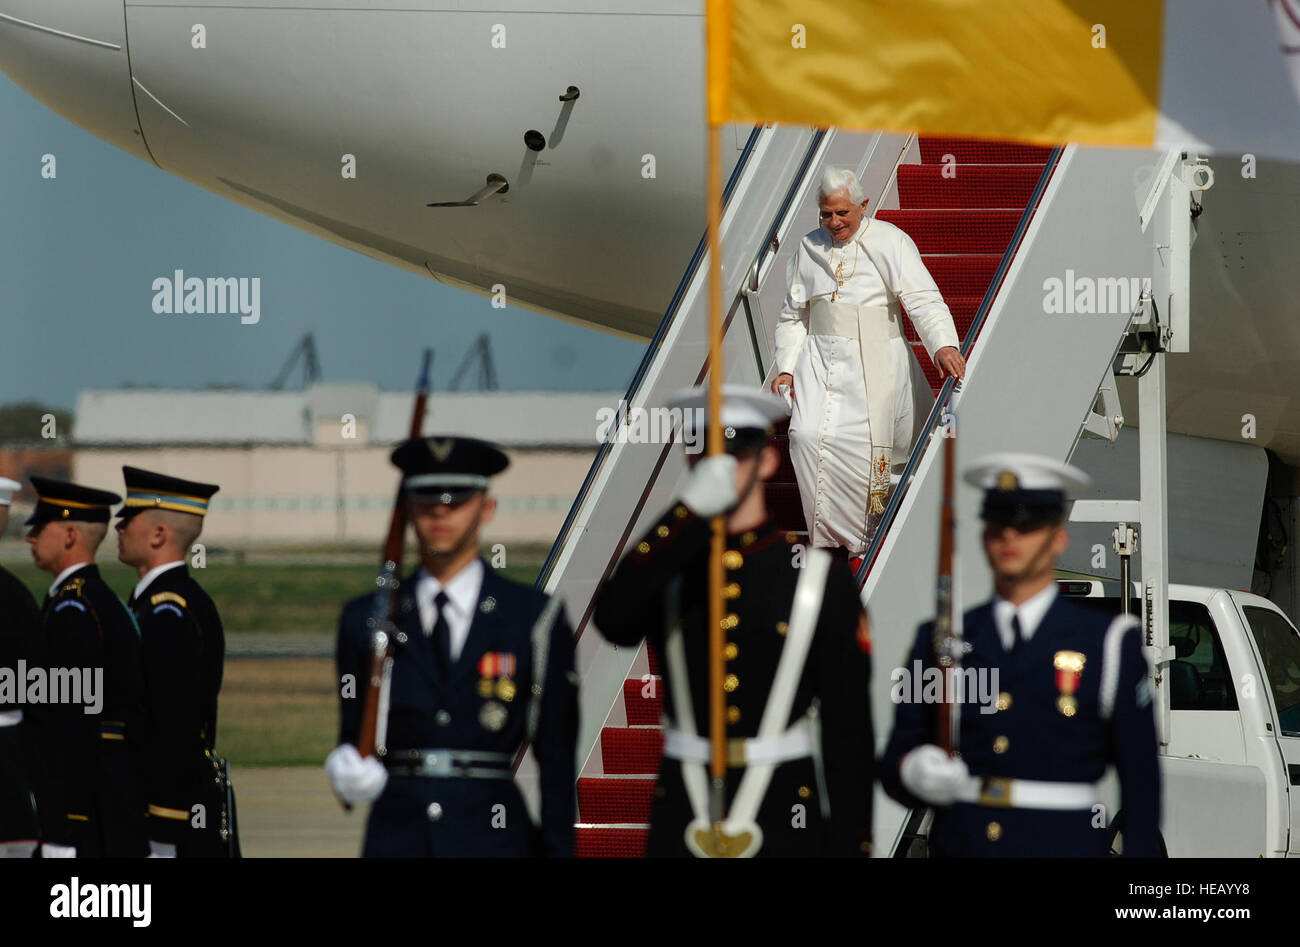 Pope Benedict XVI, hosted by the 316th Wing and the Air Force District of Washington, arrives at Andrews Air Force Base, Md., beginning his weeklong trip to the United States.  The Pontiff, selected as the 265th pope on April 19, 2005, will meet with President George W. Bush at the White House, address the presidents of Roman Catholic Colleges and Universities, and hold mass at the Nationals Park in Washing to D.C. and Yankee Stadium in New York City.   Tech Sgt. Suzanne M. Day)(Released) Stock Photo